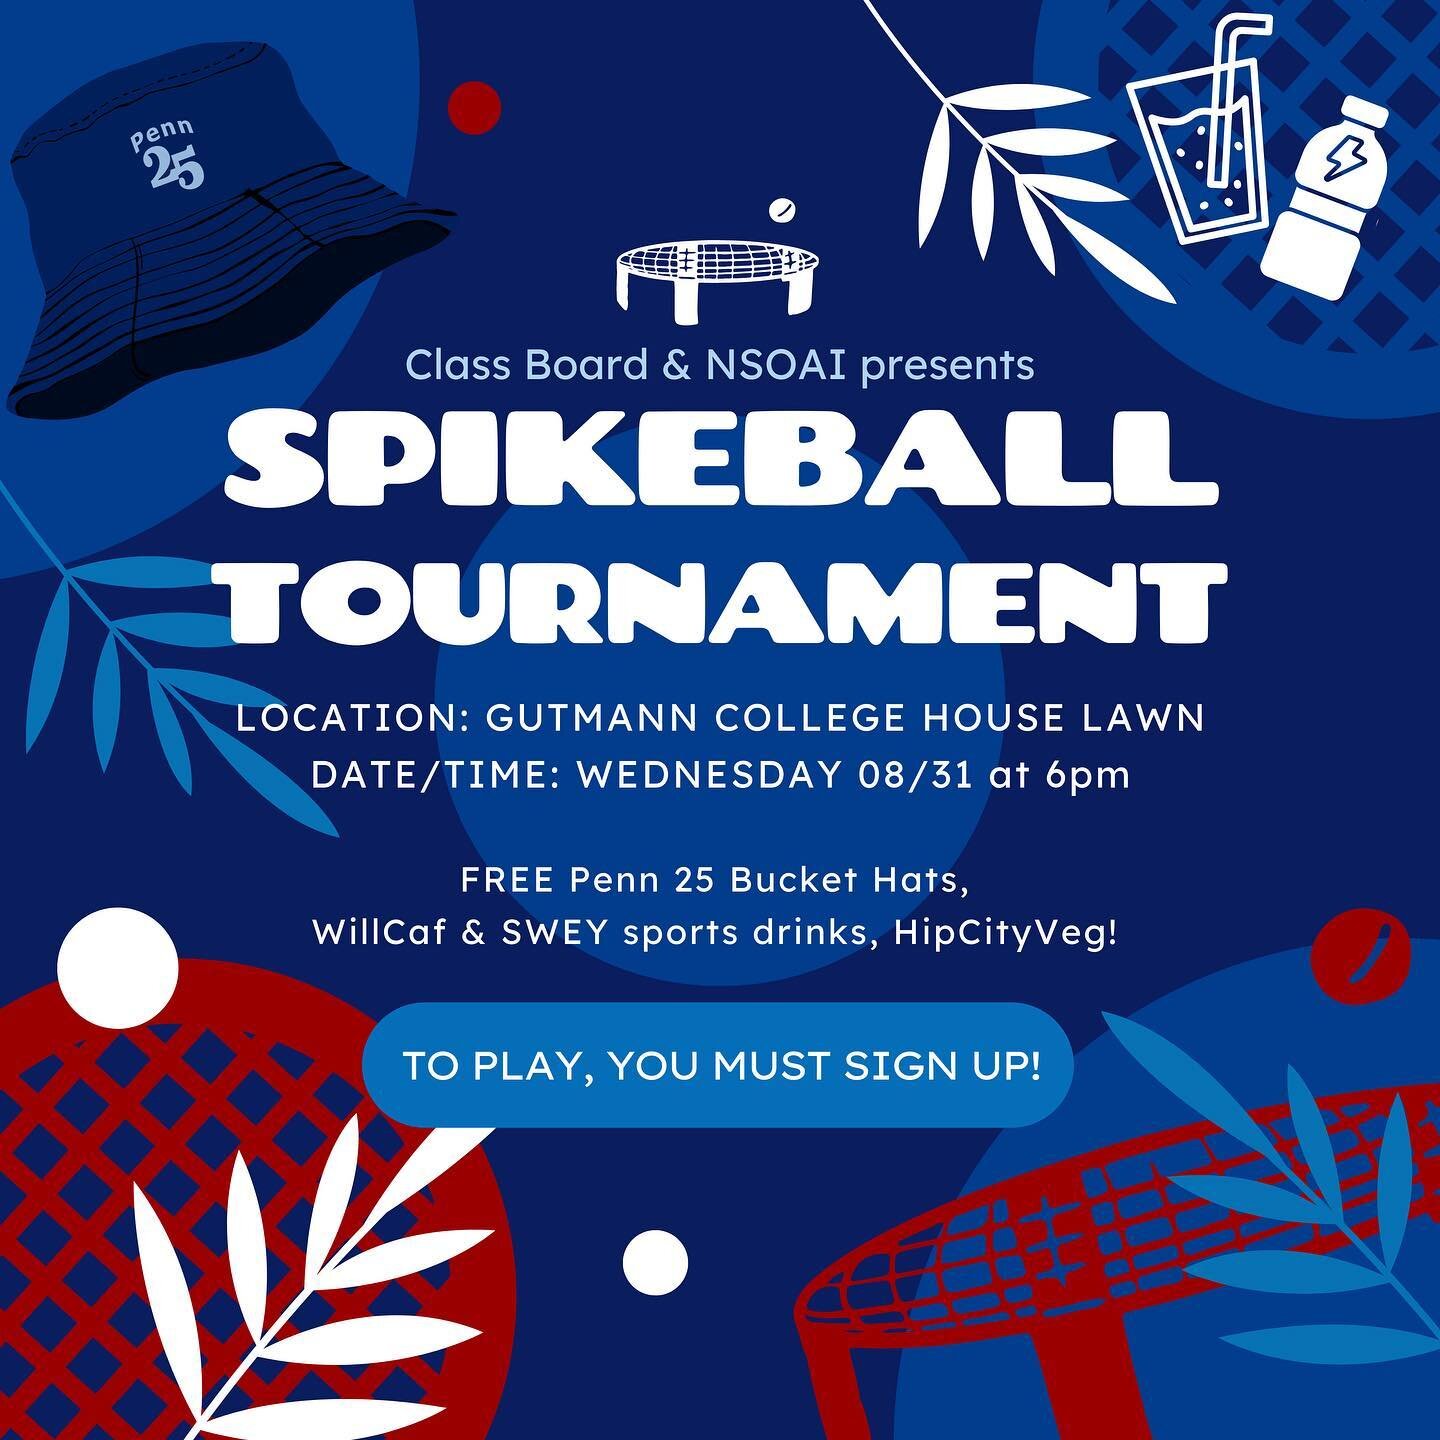 on Wednesday, August 31 at 6pm, come down to Gutmann College House Lawn (the lawn in front of what was New College House West) to compete in the largest Spikeball tournament in Penn's history!🏆

not only can you compete to be PENN&rsquo;S SPIKEBALL 